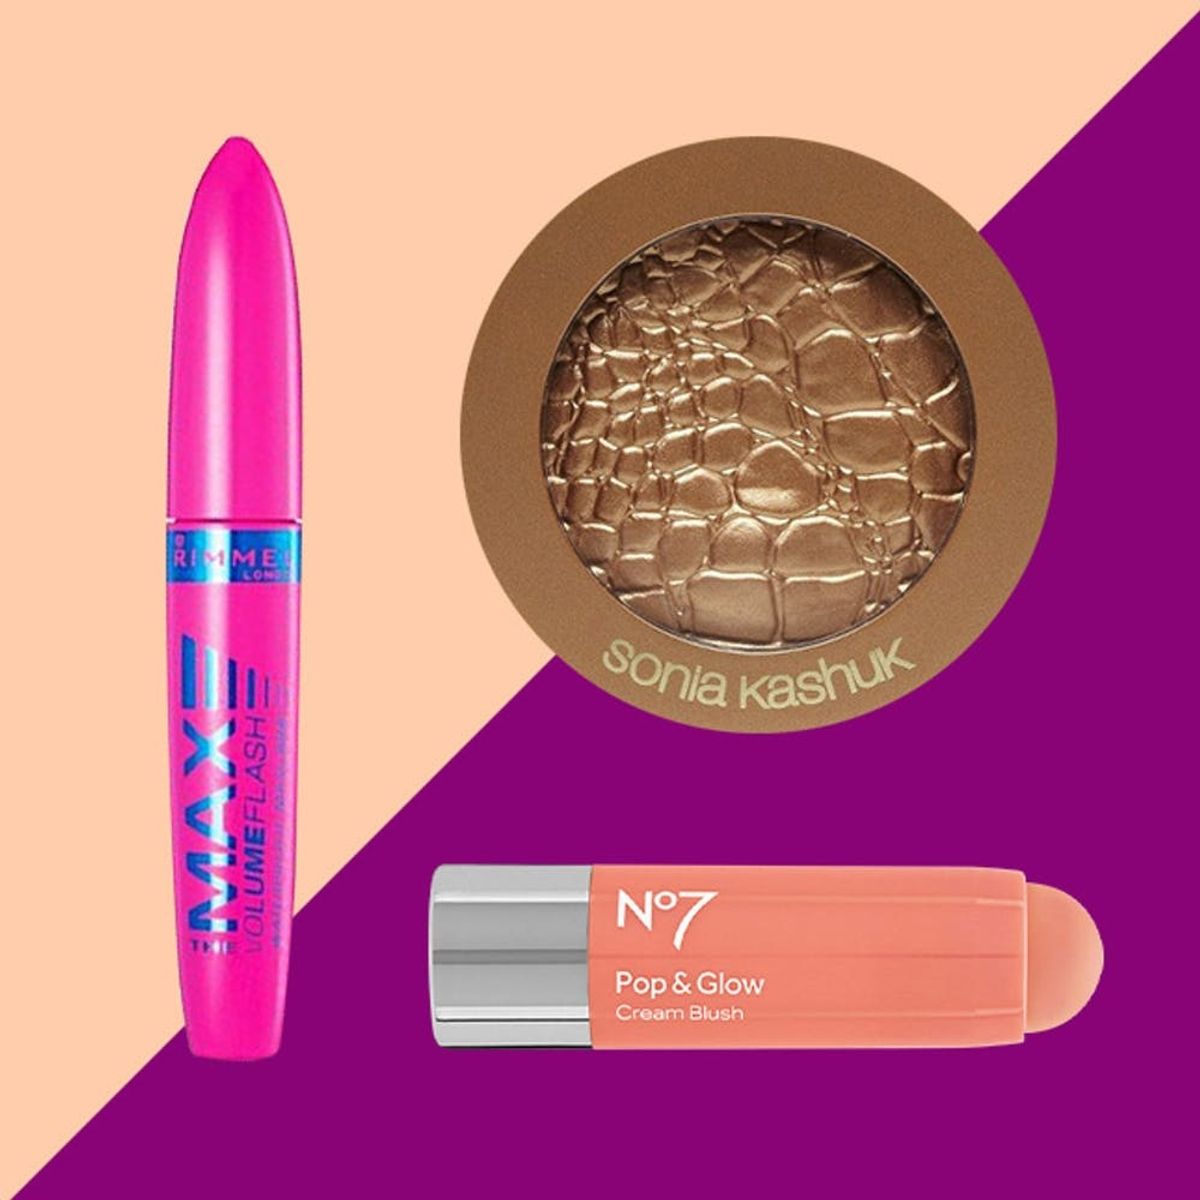 6 Makeup Essentials Under $15 to Get You Through the Weekend